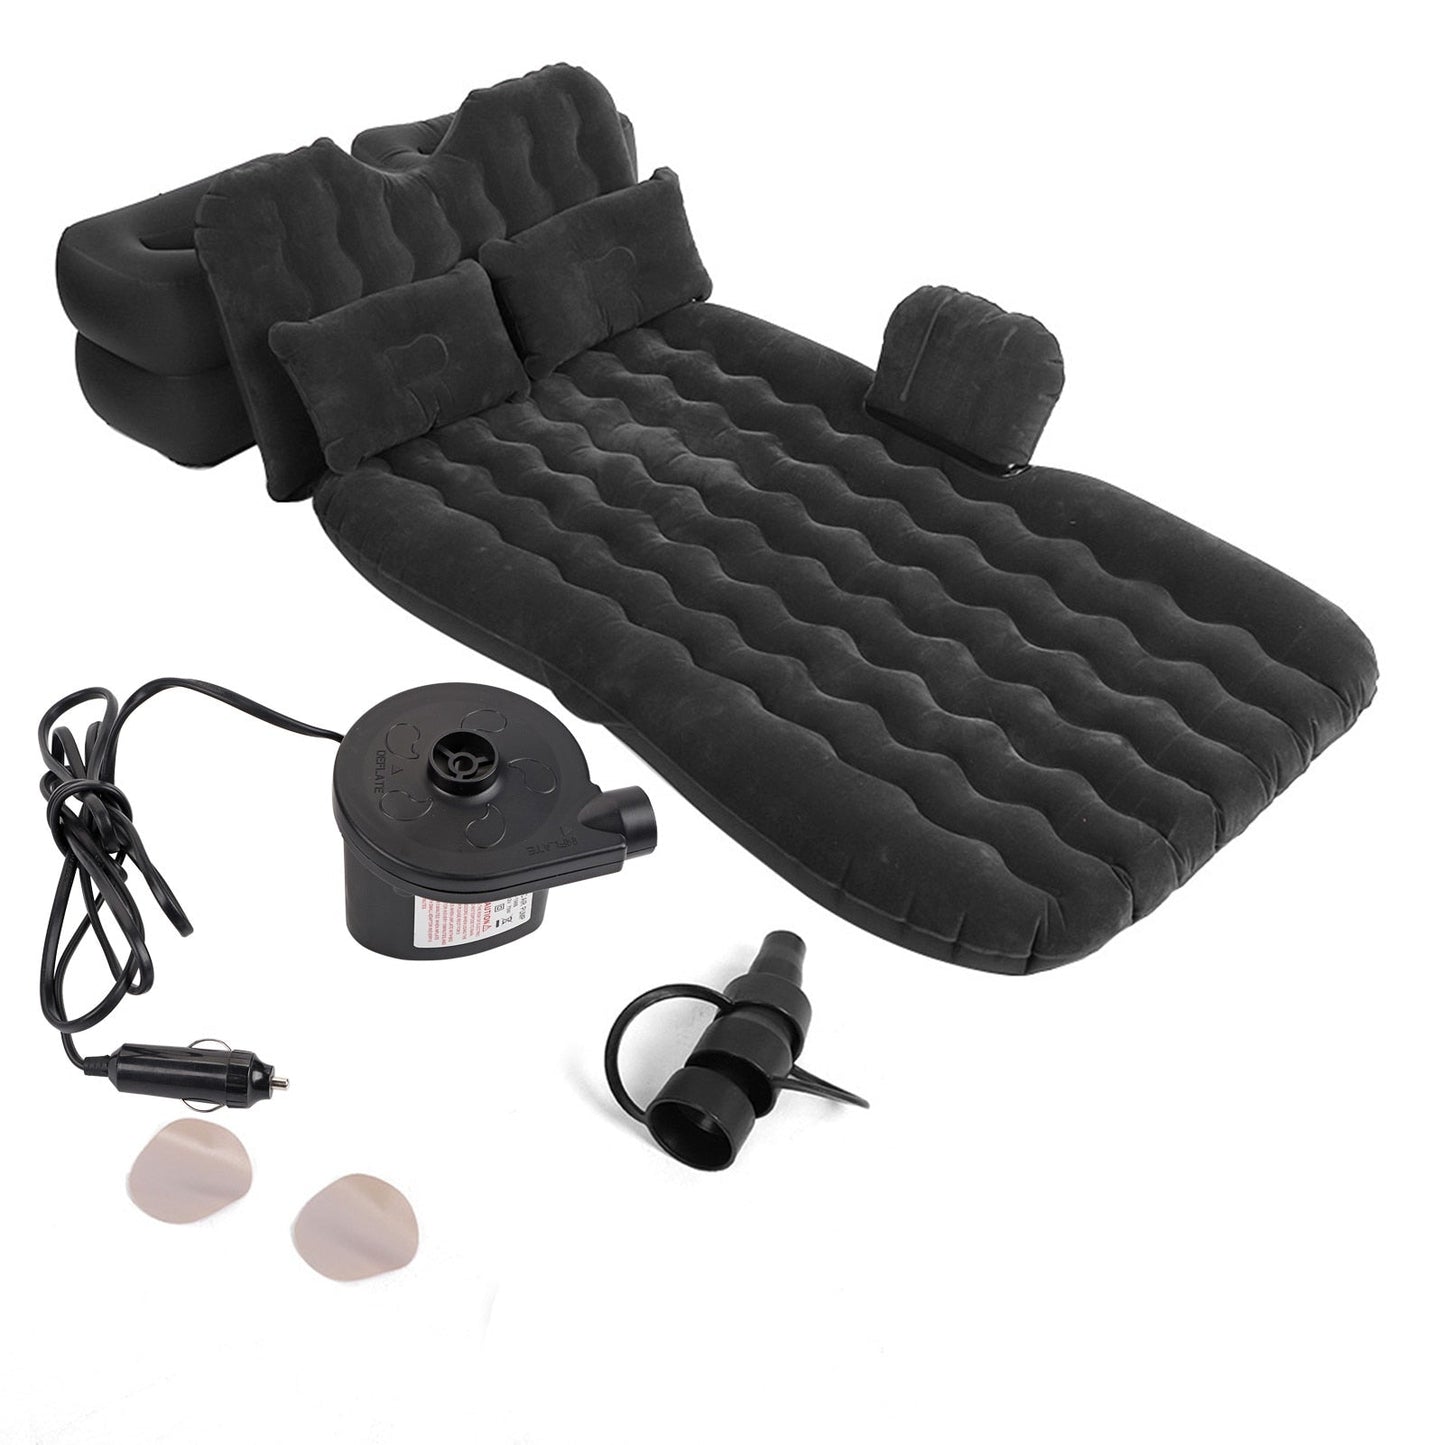 bulkysellers Comfy Car Bed